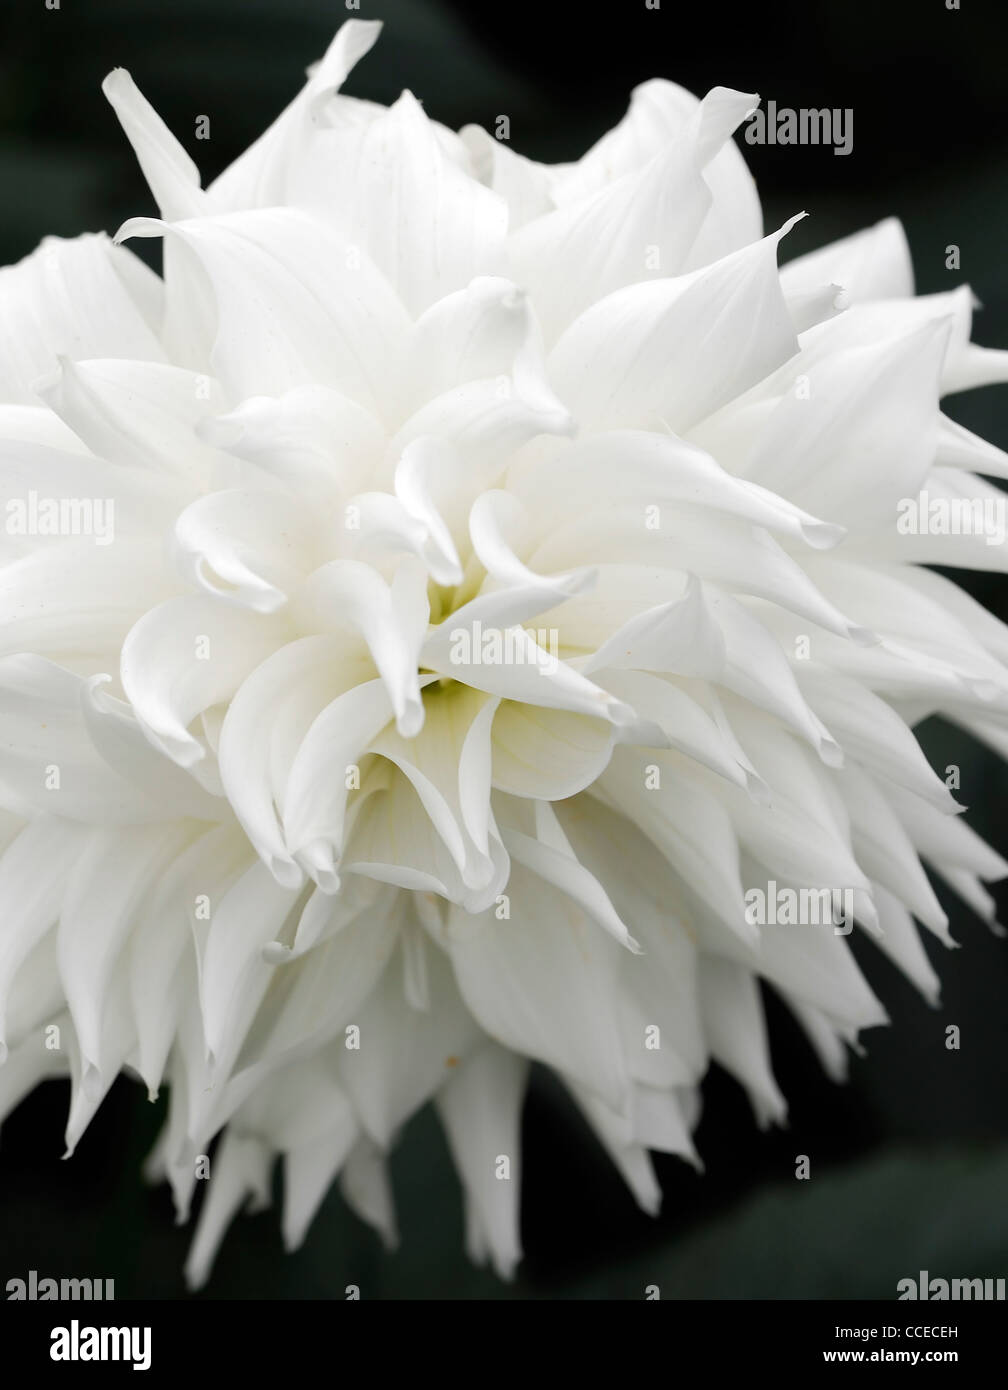 Dahlia evelyn foster white flower bloom blossom closeup plant portraits flowers flowering perennials blooms blossoms Informal me Stock Photo